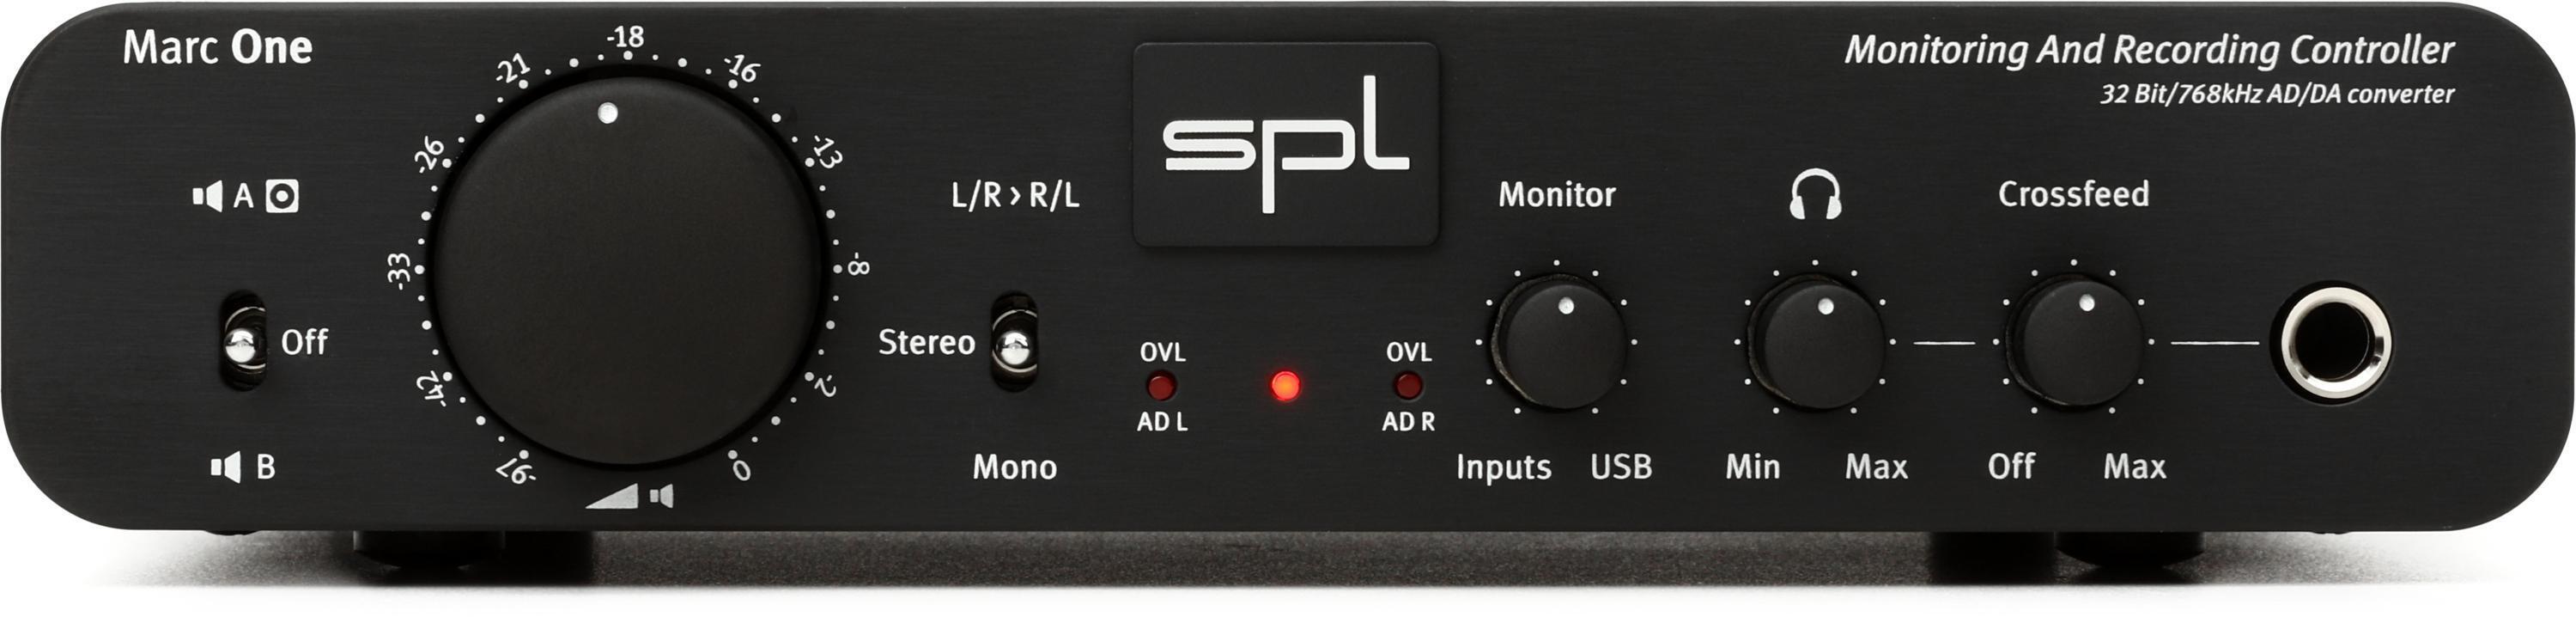 SPL Marc One Monitor and Recording Controller | Sweetwater